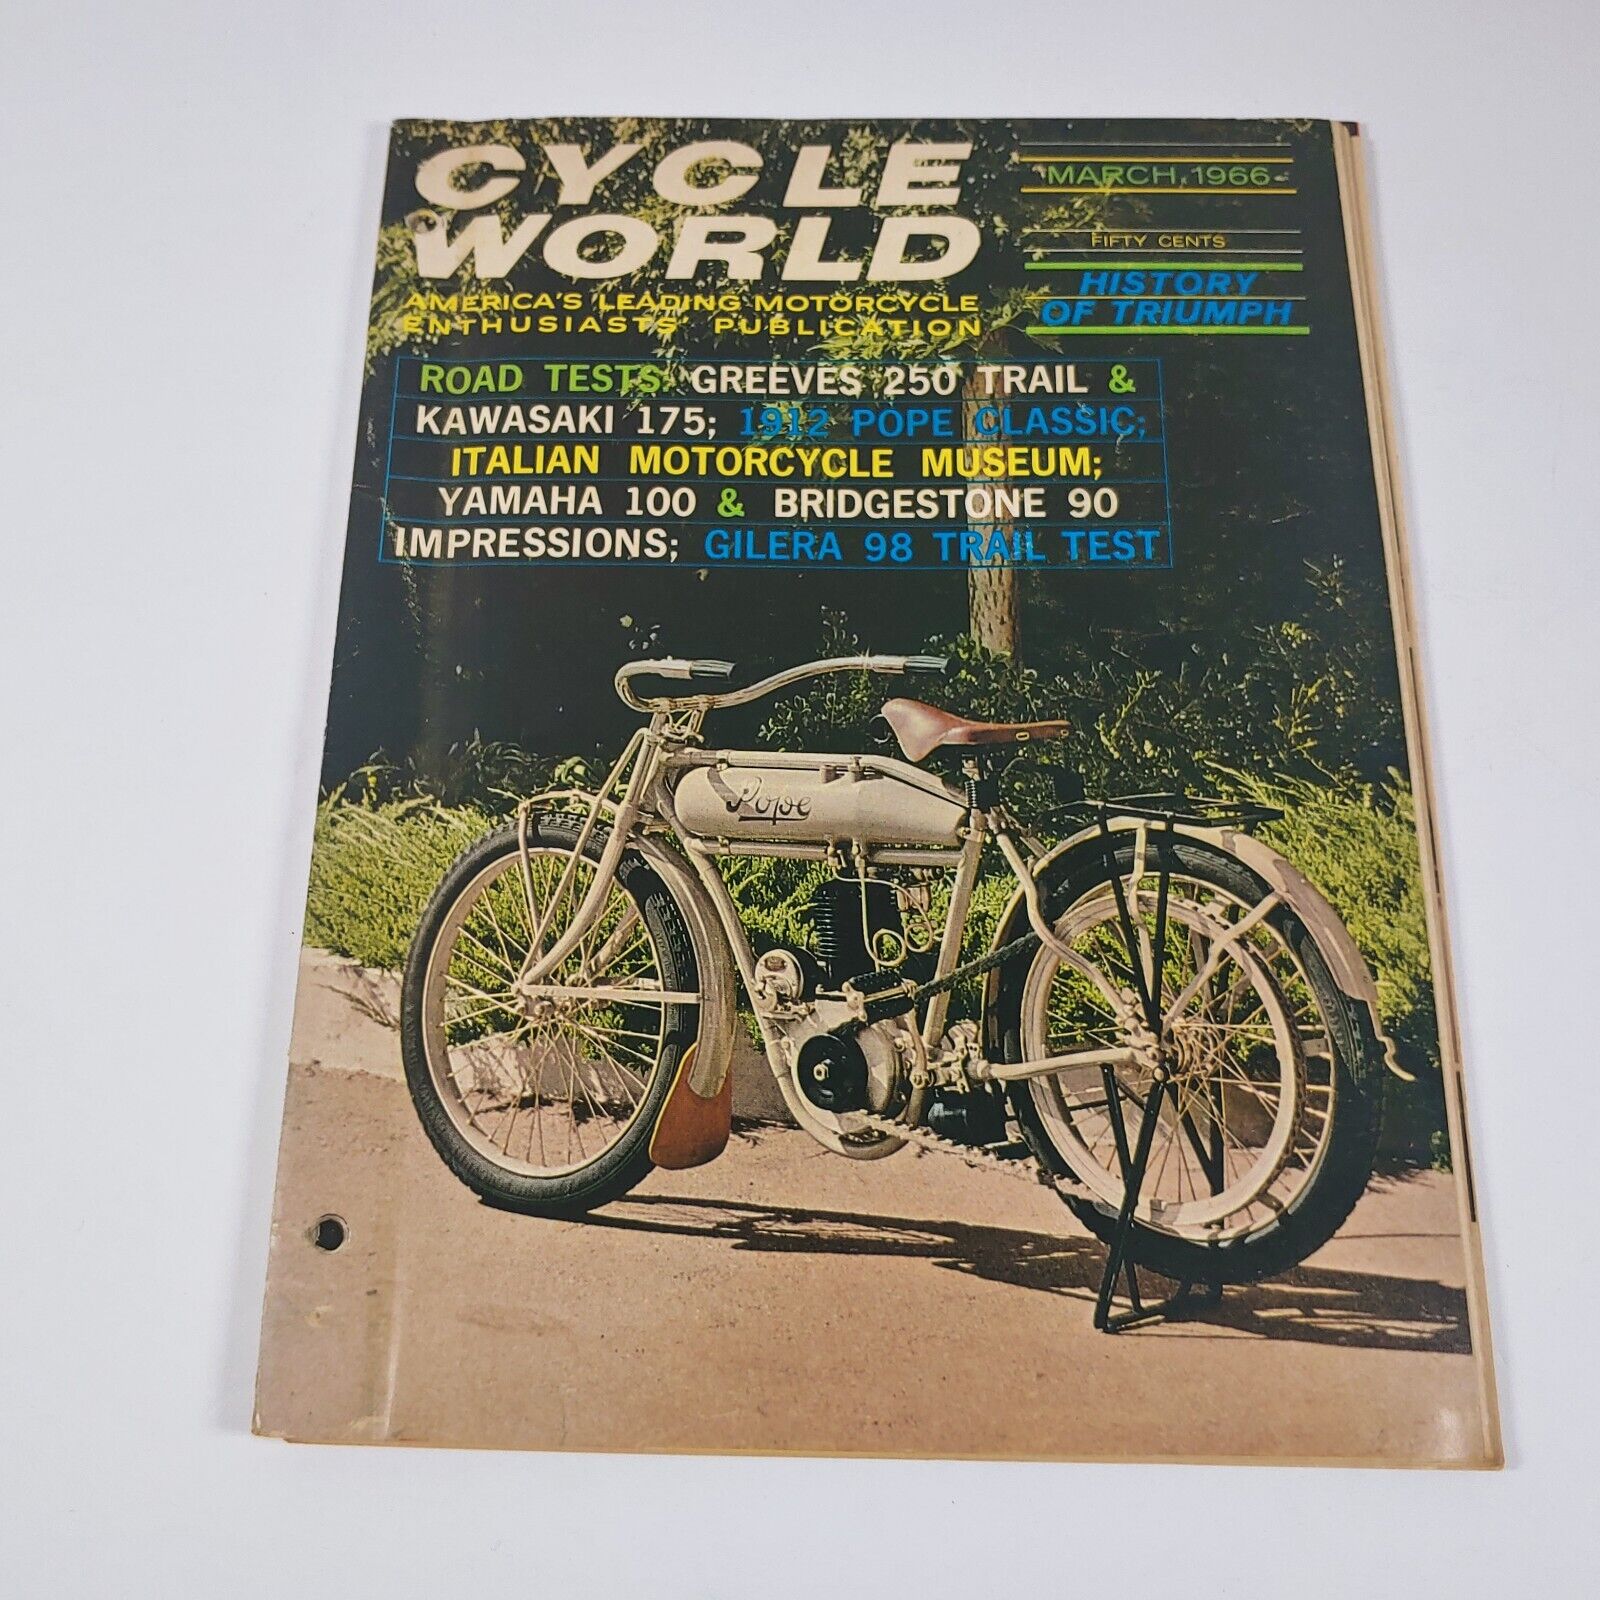 Cycle World Magazine March 1966 1912 Pope Classic On Cover